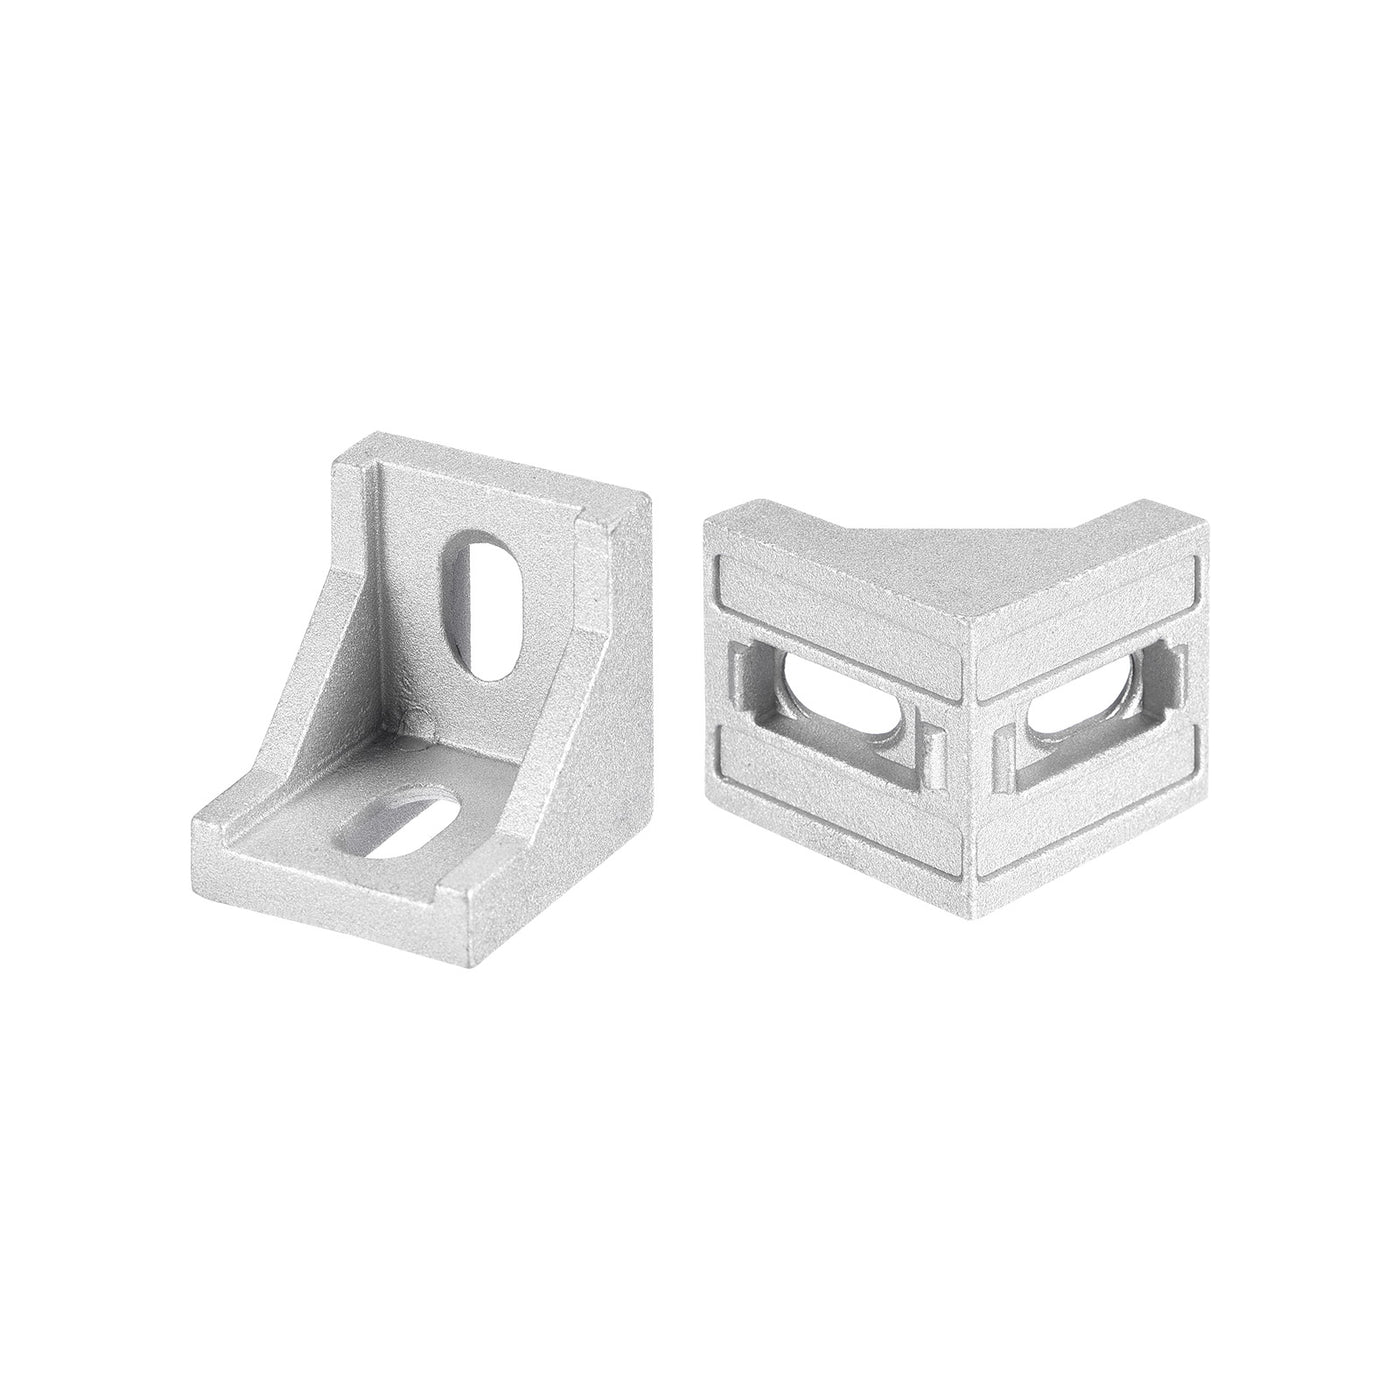 uxcell Uxcell 8Pcs Inside Corner Bracket Gusset, 38x38x35mm 4040 Thicken Angle Connectors for 4040/4080 Series Aluminum Extrusion Profile Silver